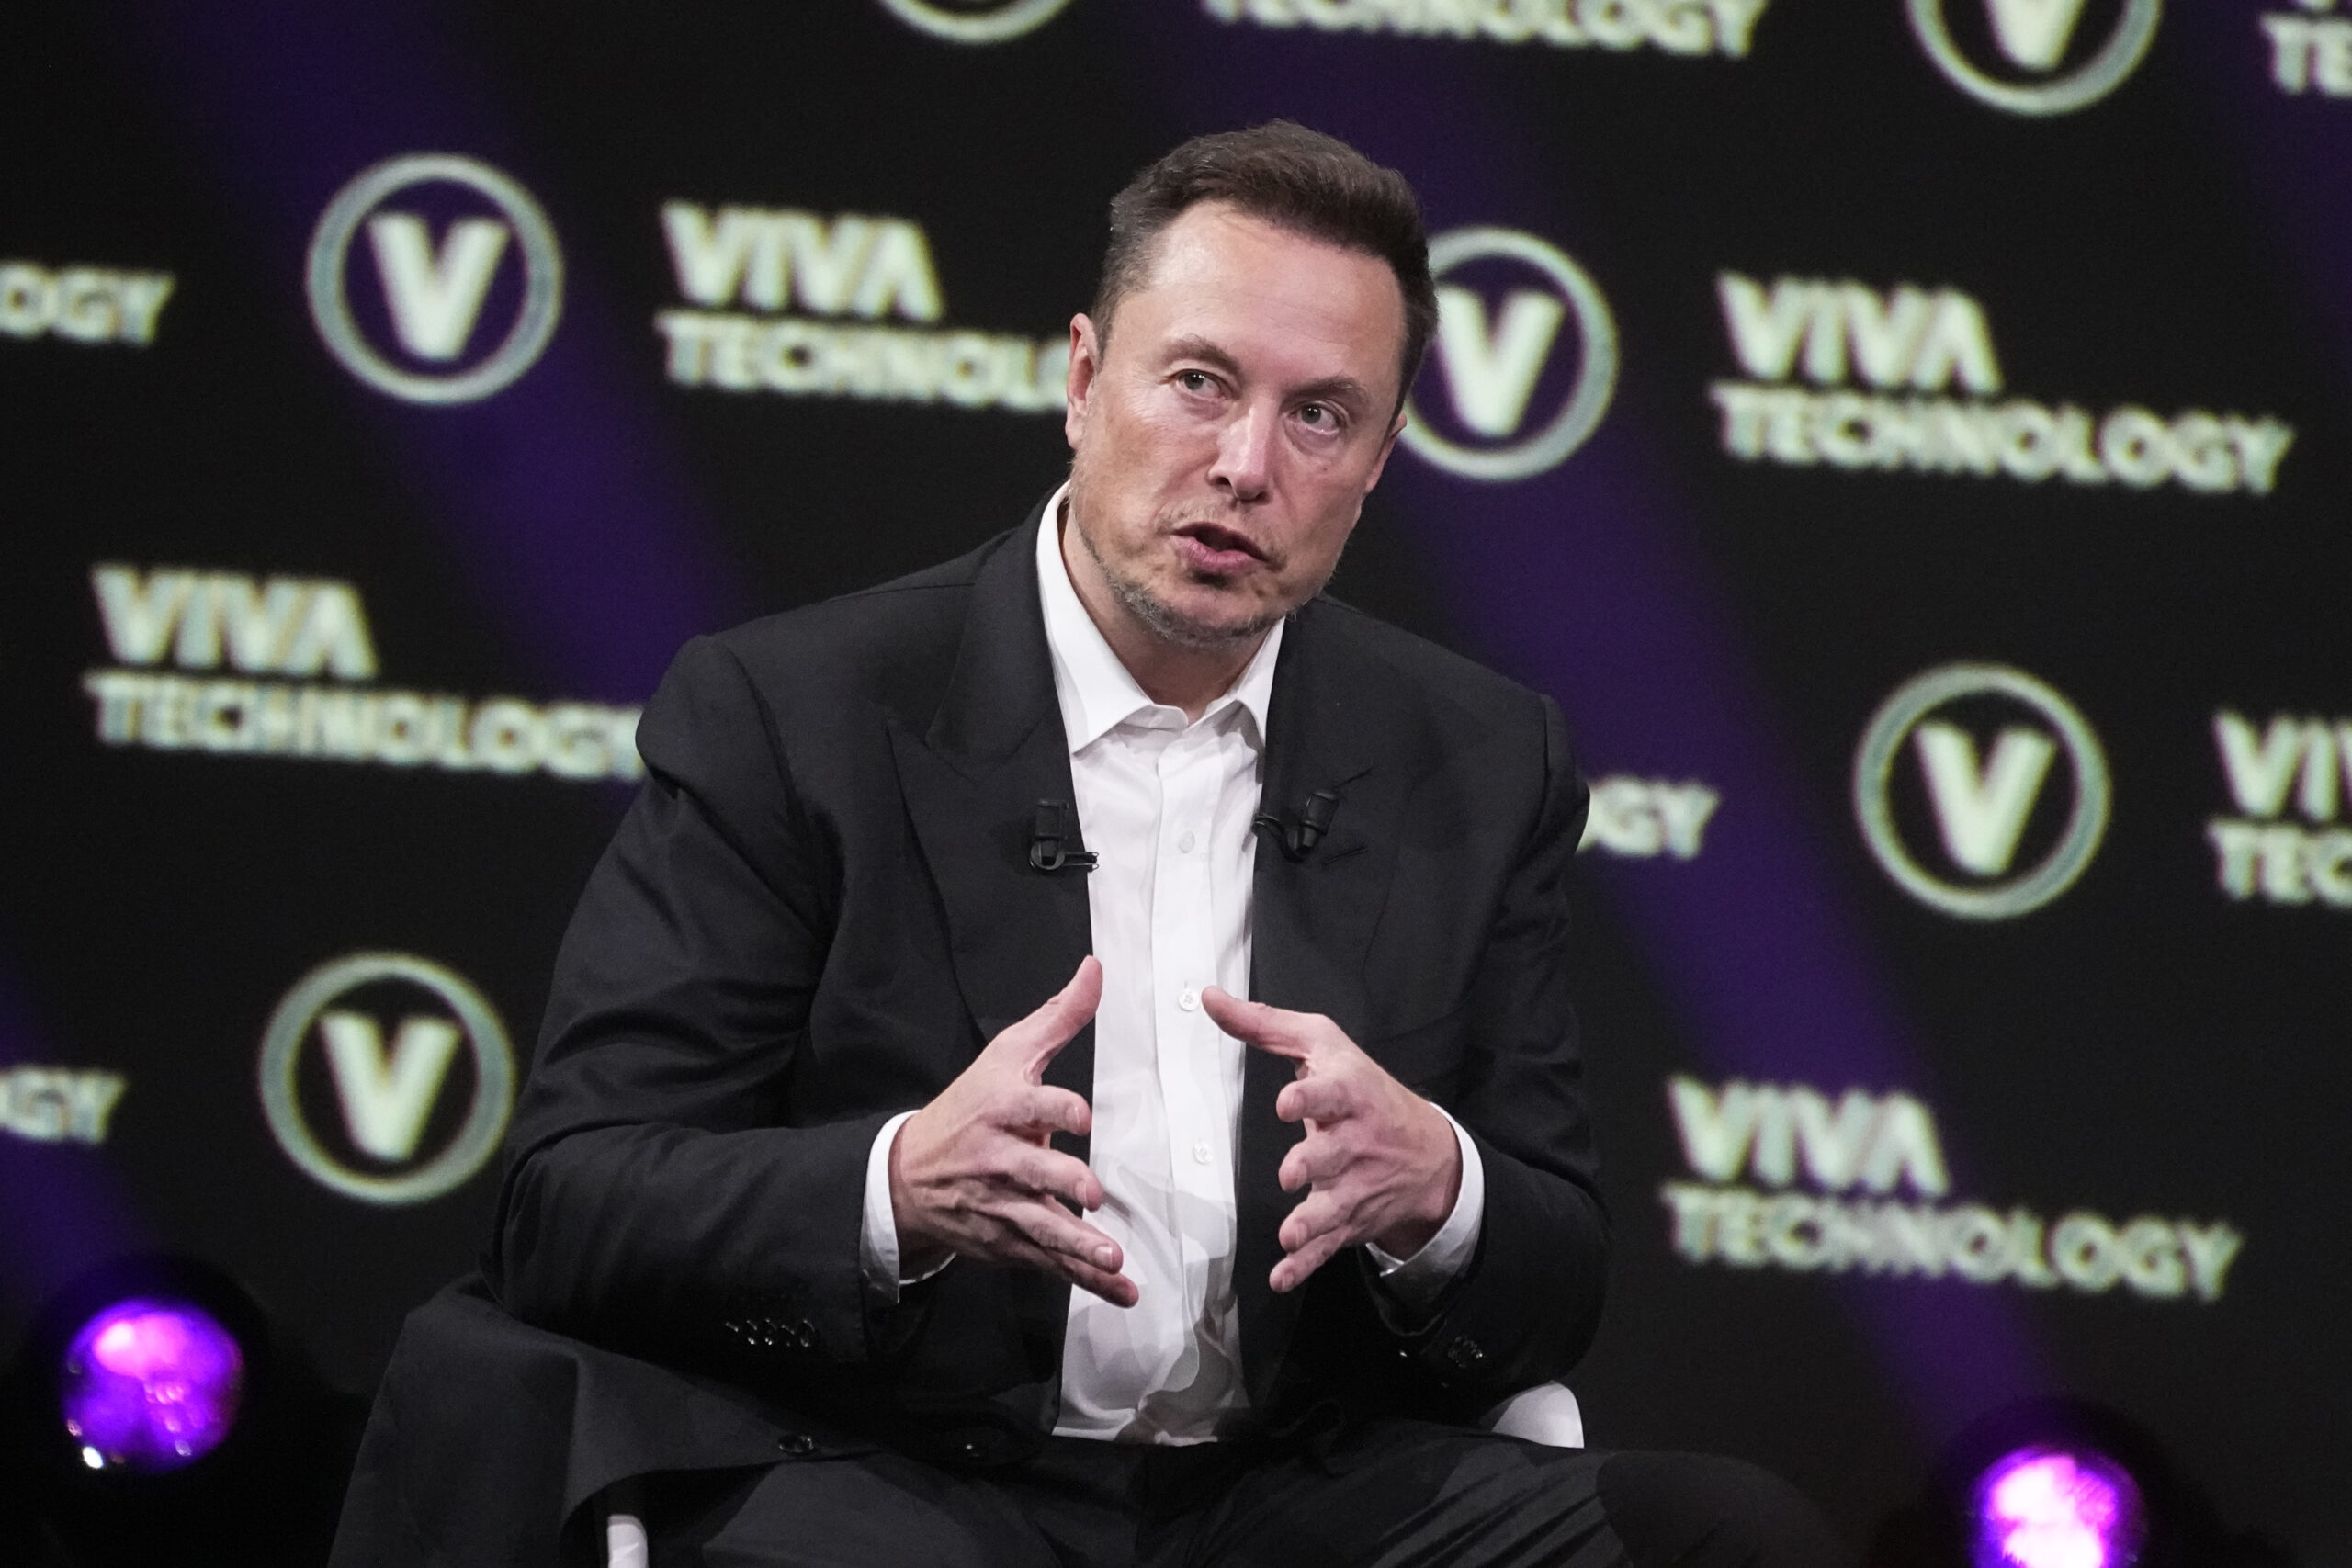 Elon Musk Says Fight With Zuckerberg Will Take Place in ‘Epic Location’ in Italy — But Only After He Recovers From Upcoming Surgery